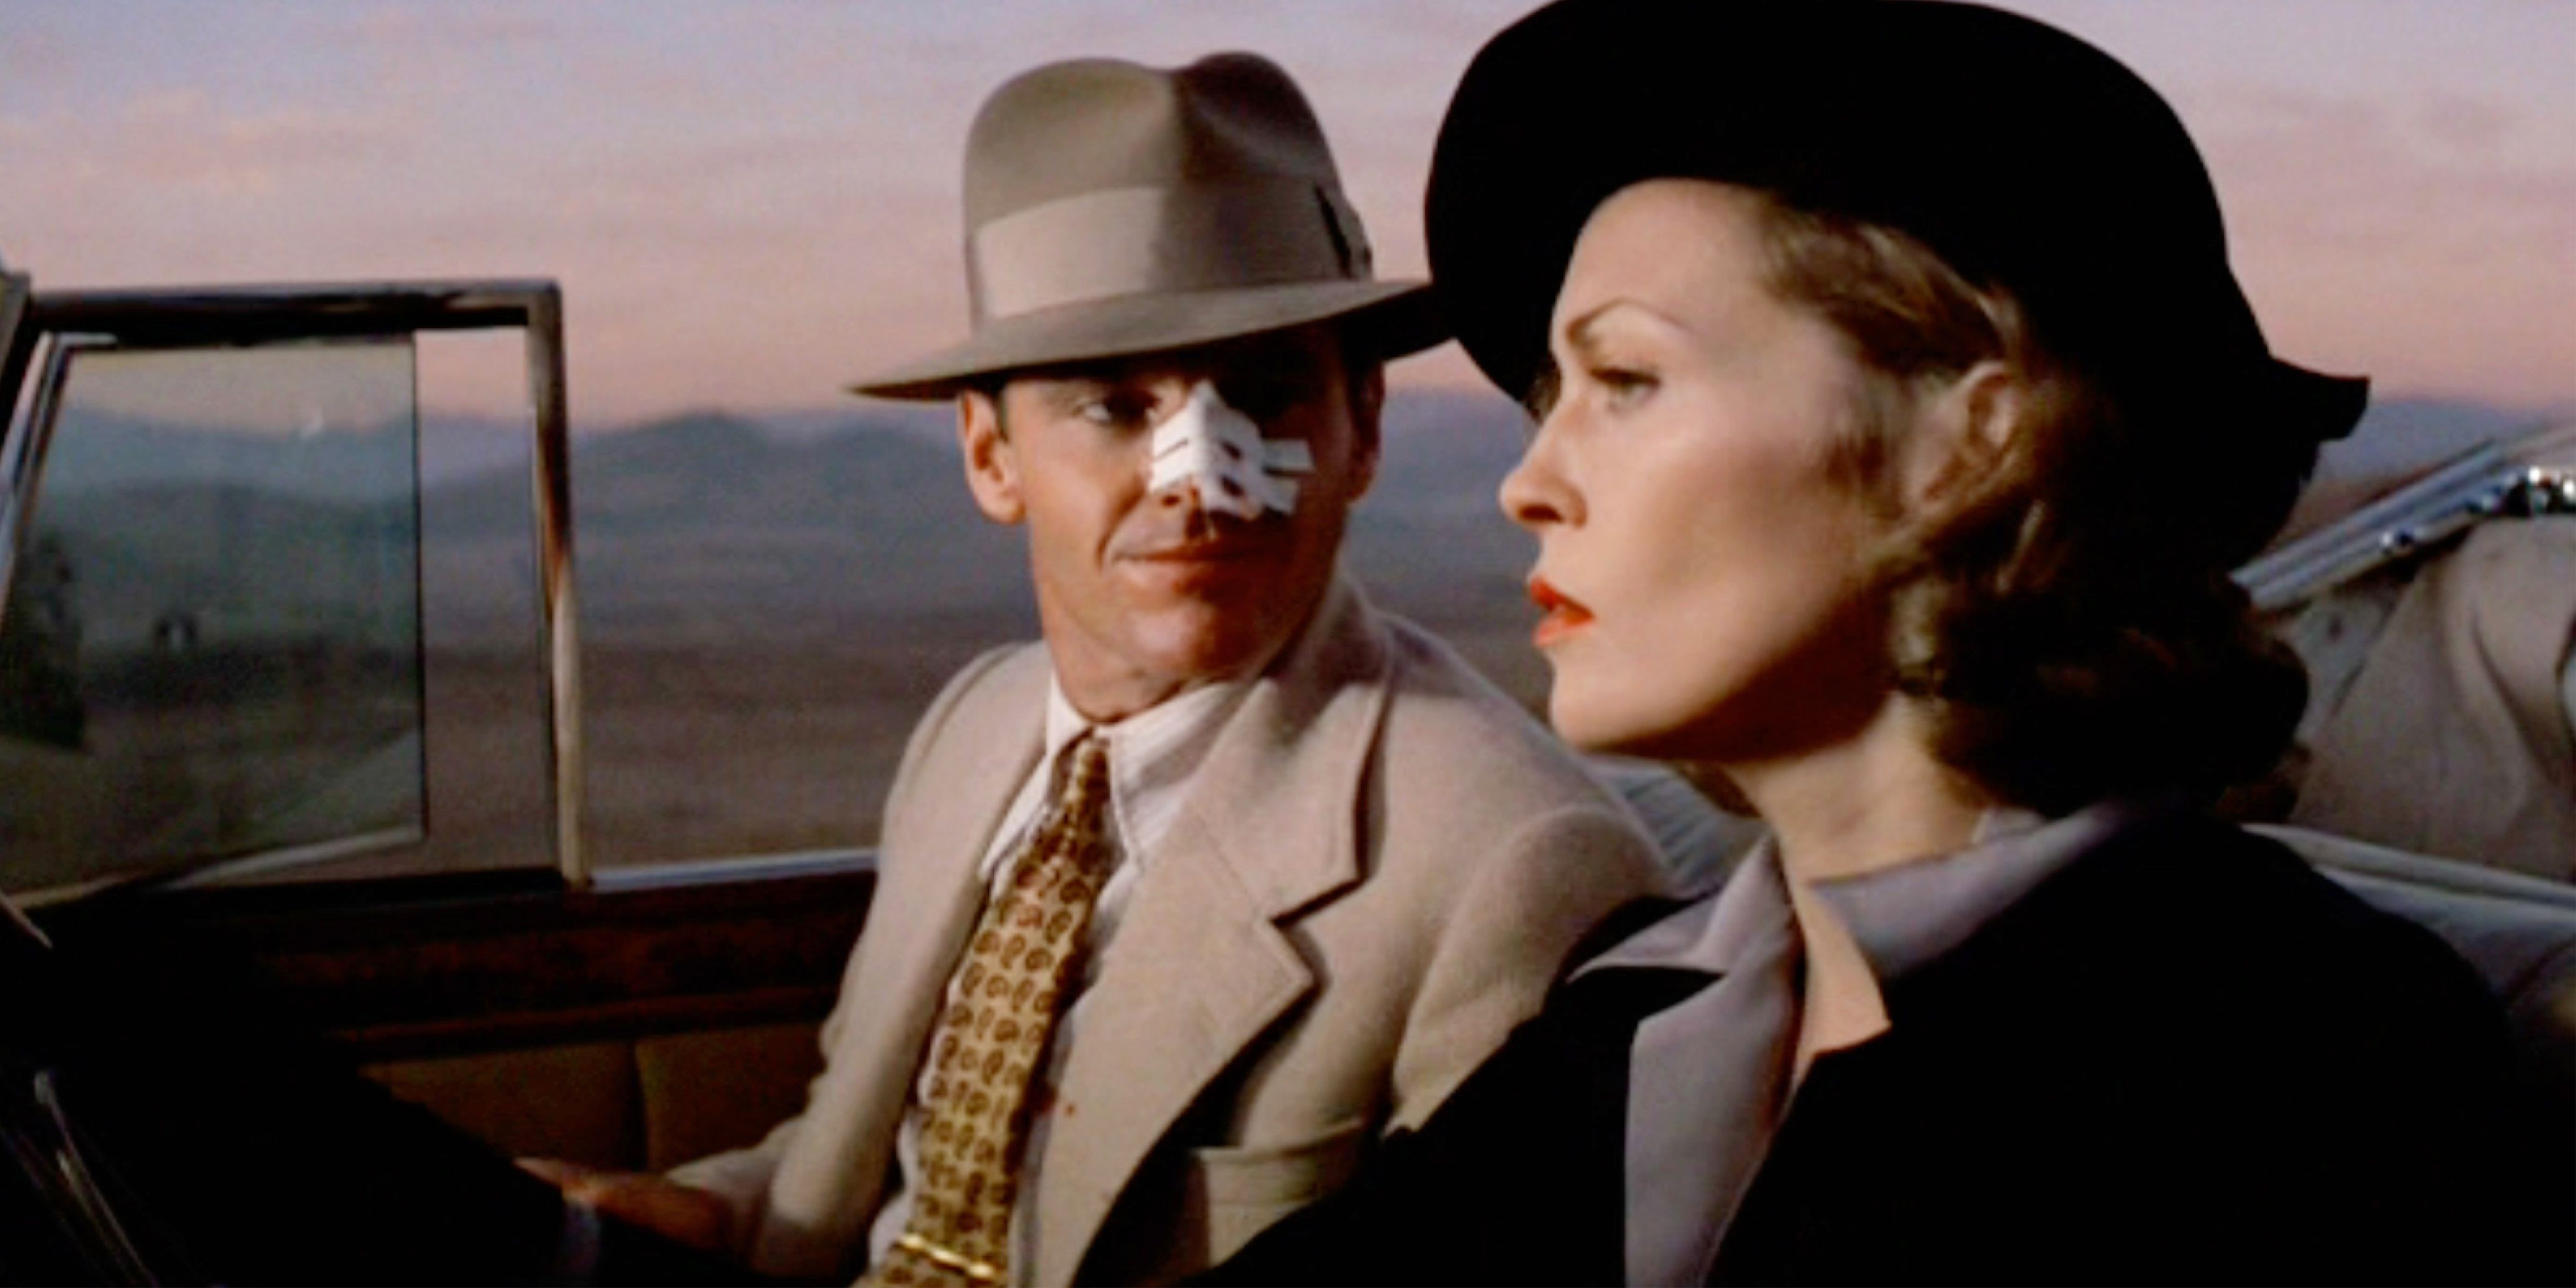 Jack Nicholson and Faye Dunaway in a car in Chinatown